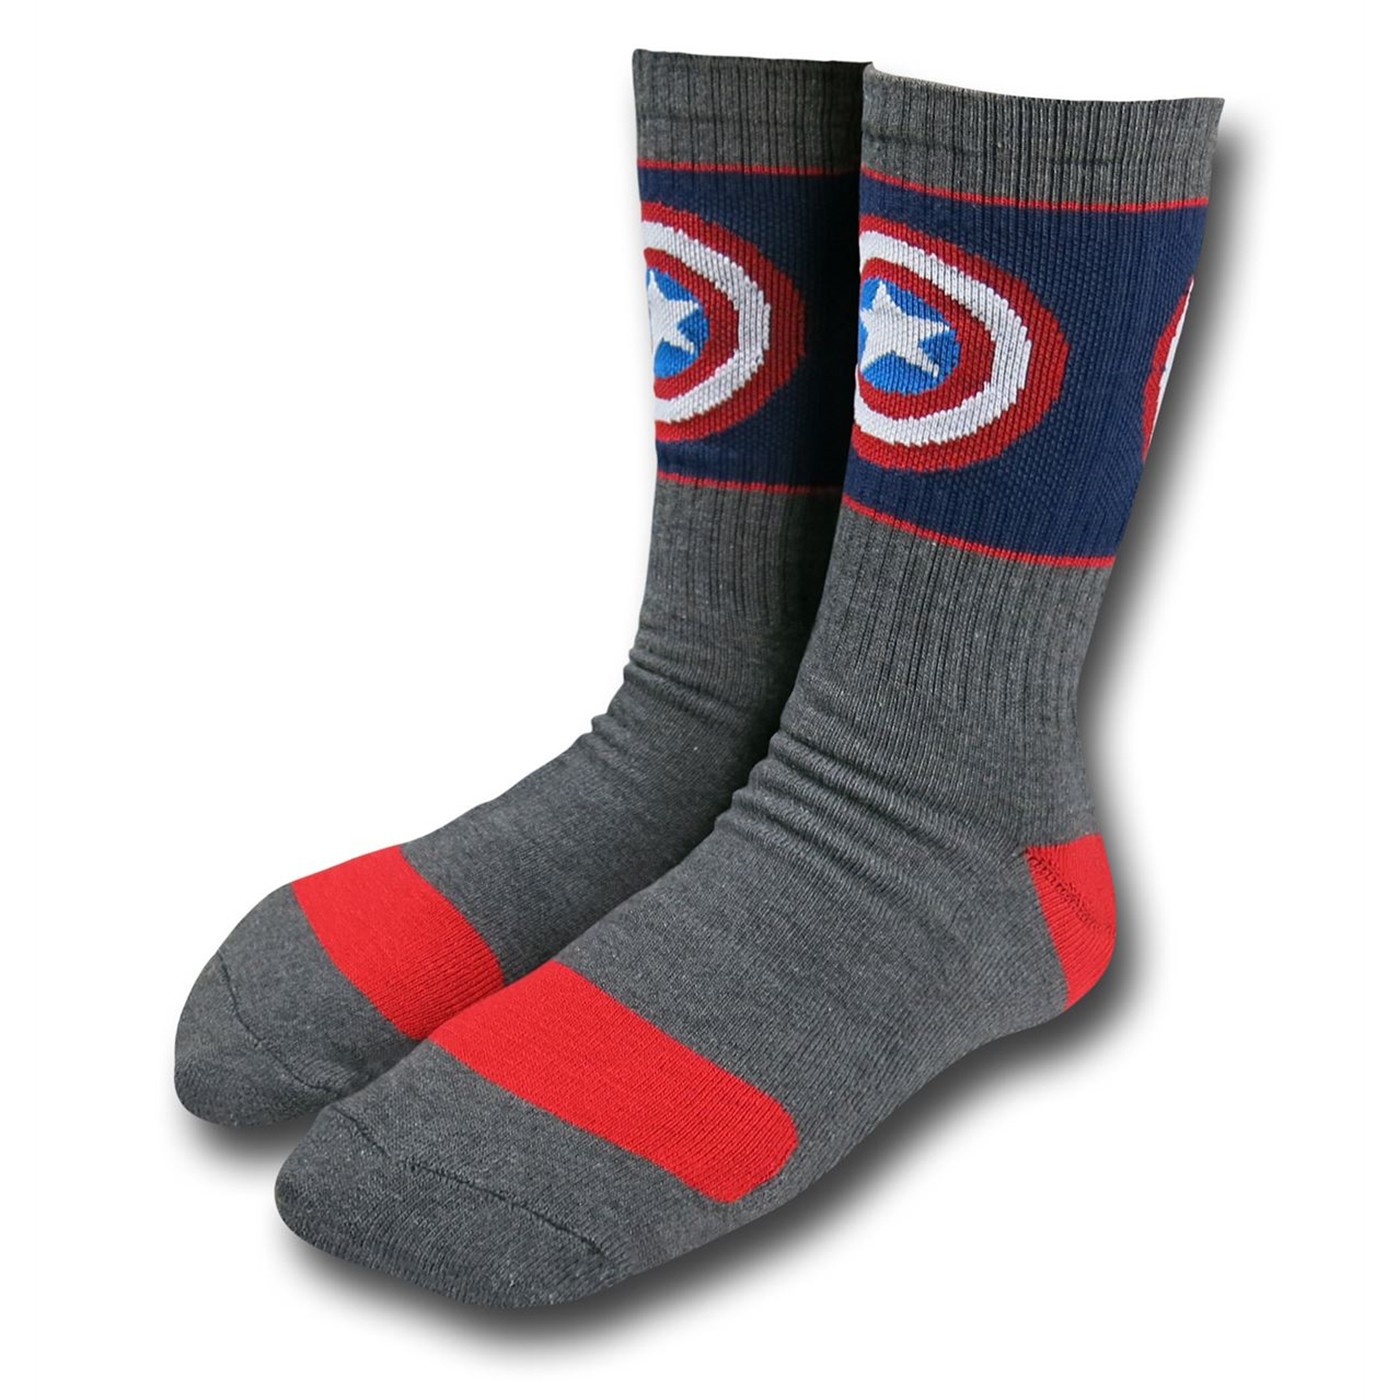 Captain America Blue and Grey Socks 2-Pack